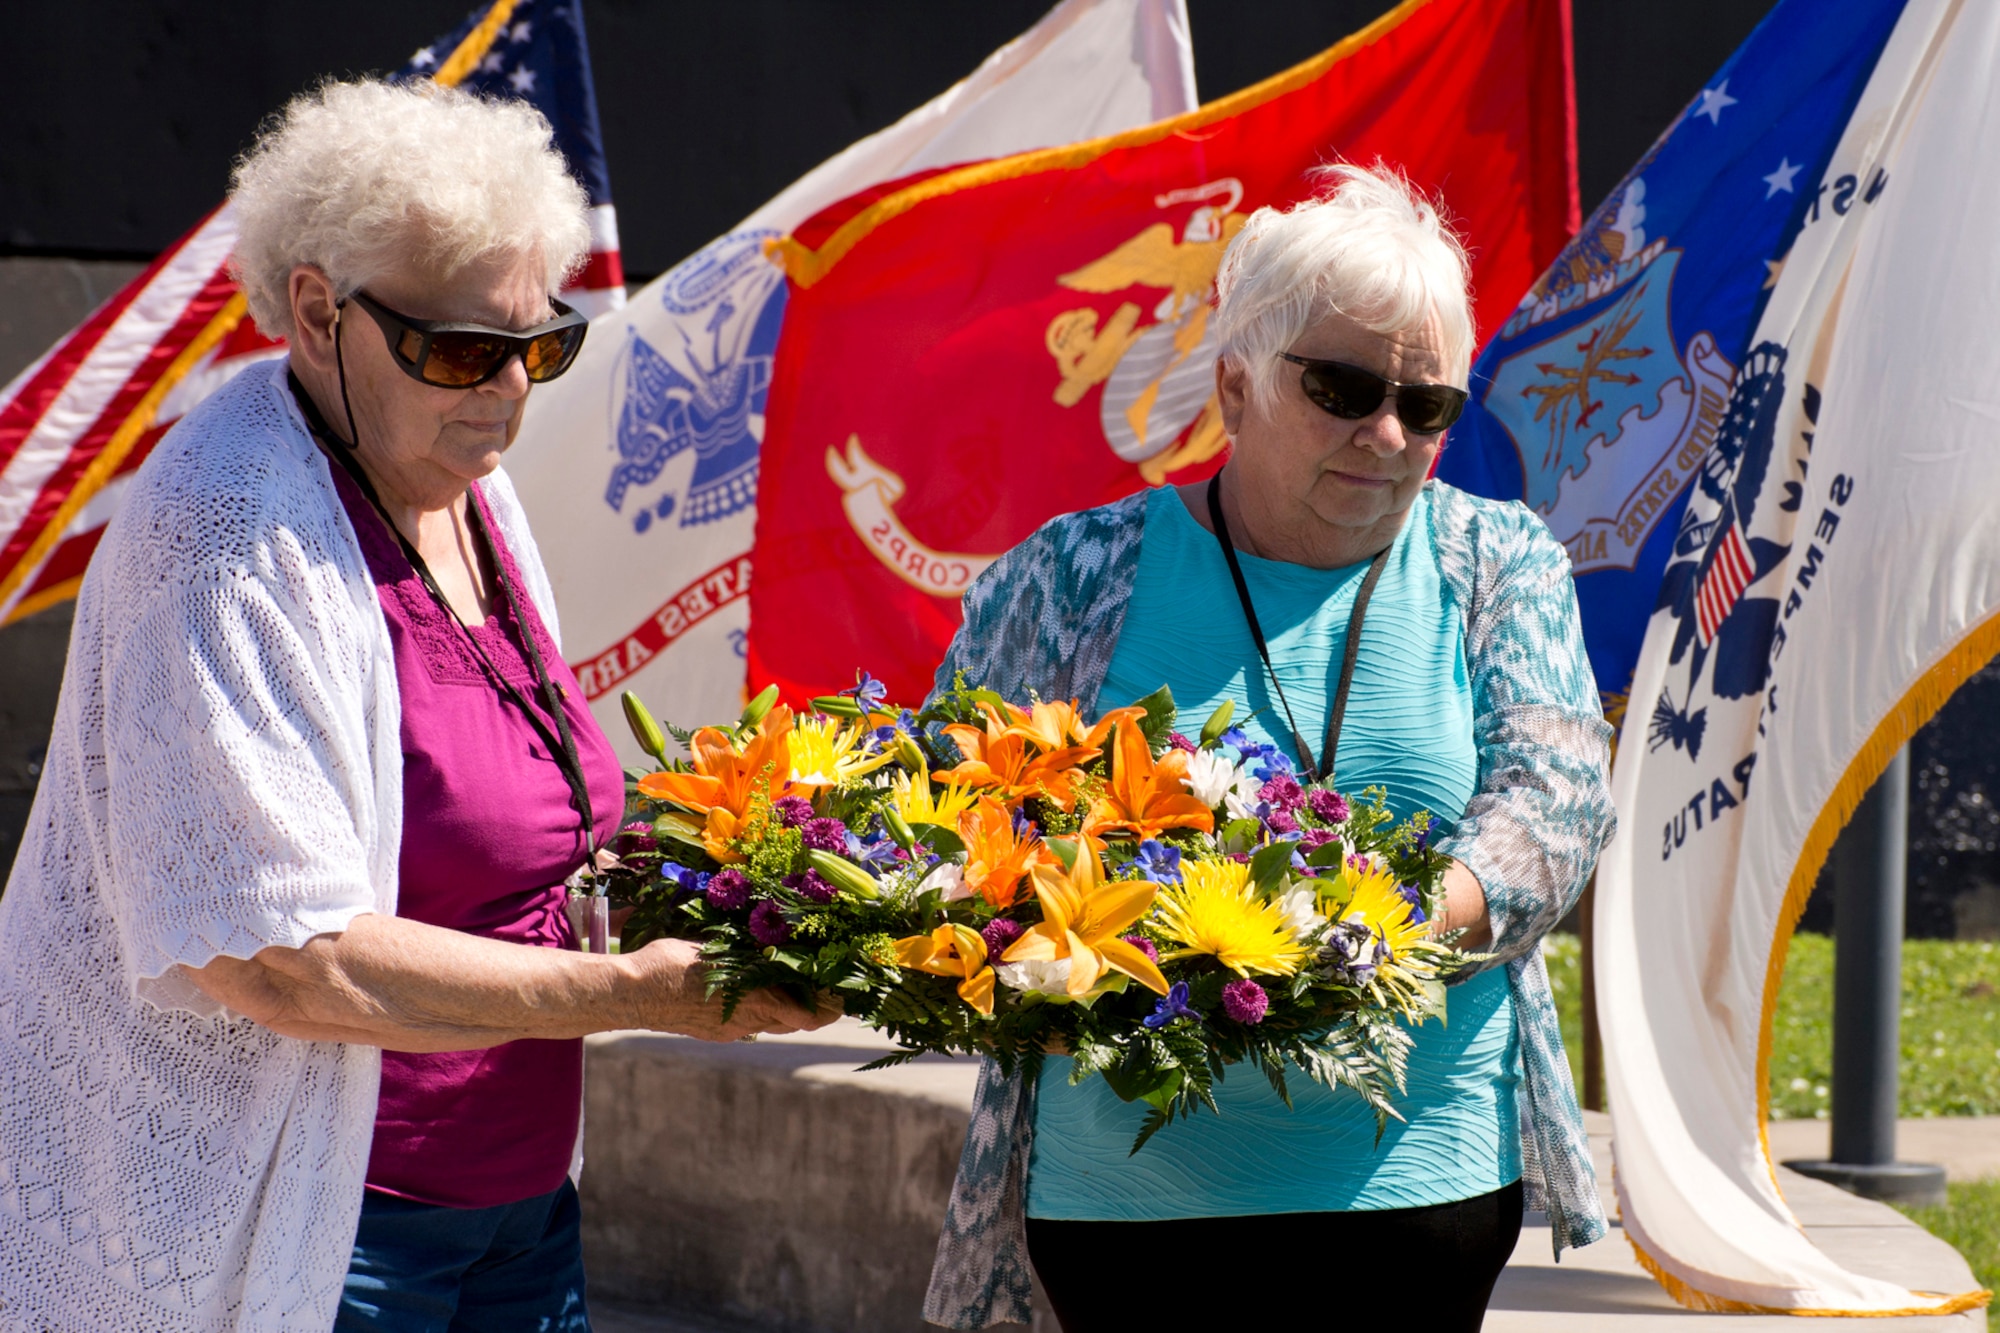 (Left) Cheryl Beckett and Barbara Smith prepare to put a wreath into the water in memory of the dead during the “All Cavalla Reunion Memorial Service” at Seawolf Park in Galveston, Texas, Apr. 23, 2016. Both women are spouses of former Cavalla crewmembers. The bi-annual reunion is an opportunity for former crewmembers of the USS Cavalla SS - SSK - AGSS – 244 and USS Cavalla (SSN 684) to reconnect with each other, make new friends, share sea stories and honor the memory of those submariners who have passed. U.S. Air Force Reserve Master Sgt. Jeff Walston, a public affairs technician assigned to the 913th Airlift Group at Little Rock Air Force Base, Ark., served on the USS Cavalla (SSN 684) from 1977 to 1979, while he was in the U.S. Navy. (Courtesy photo by Jeff Walston)